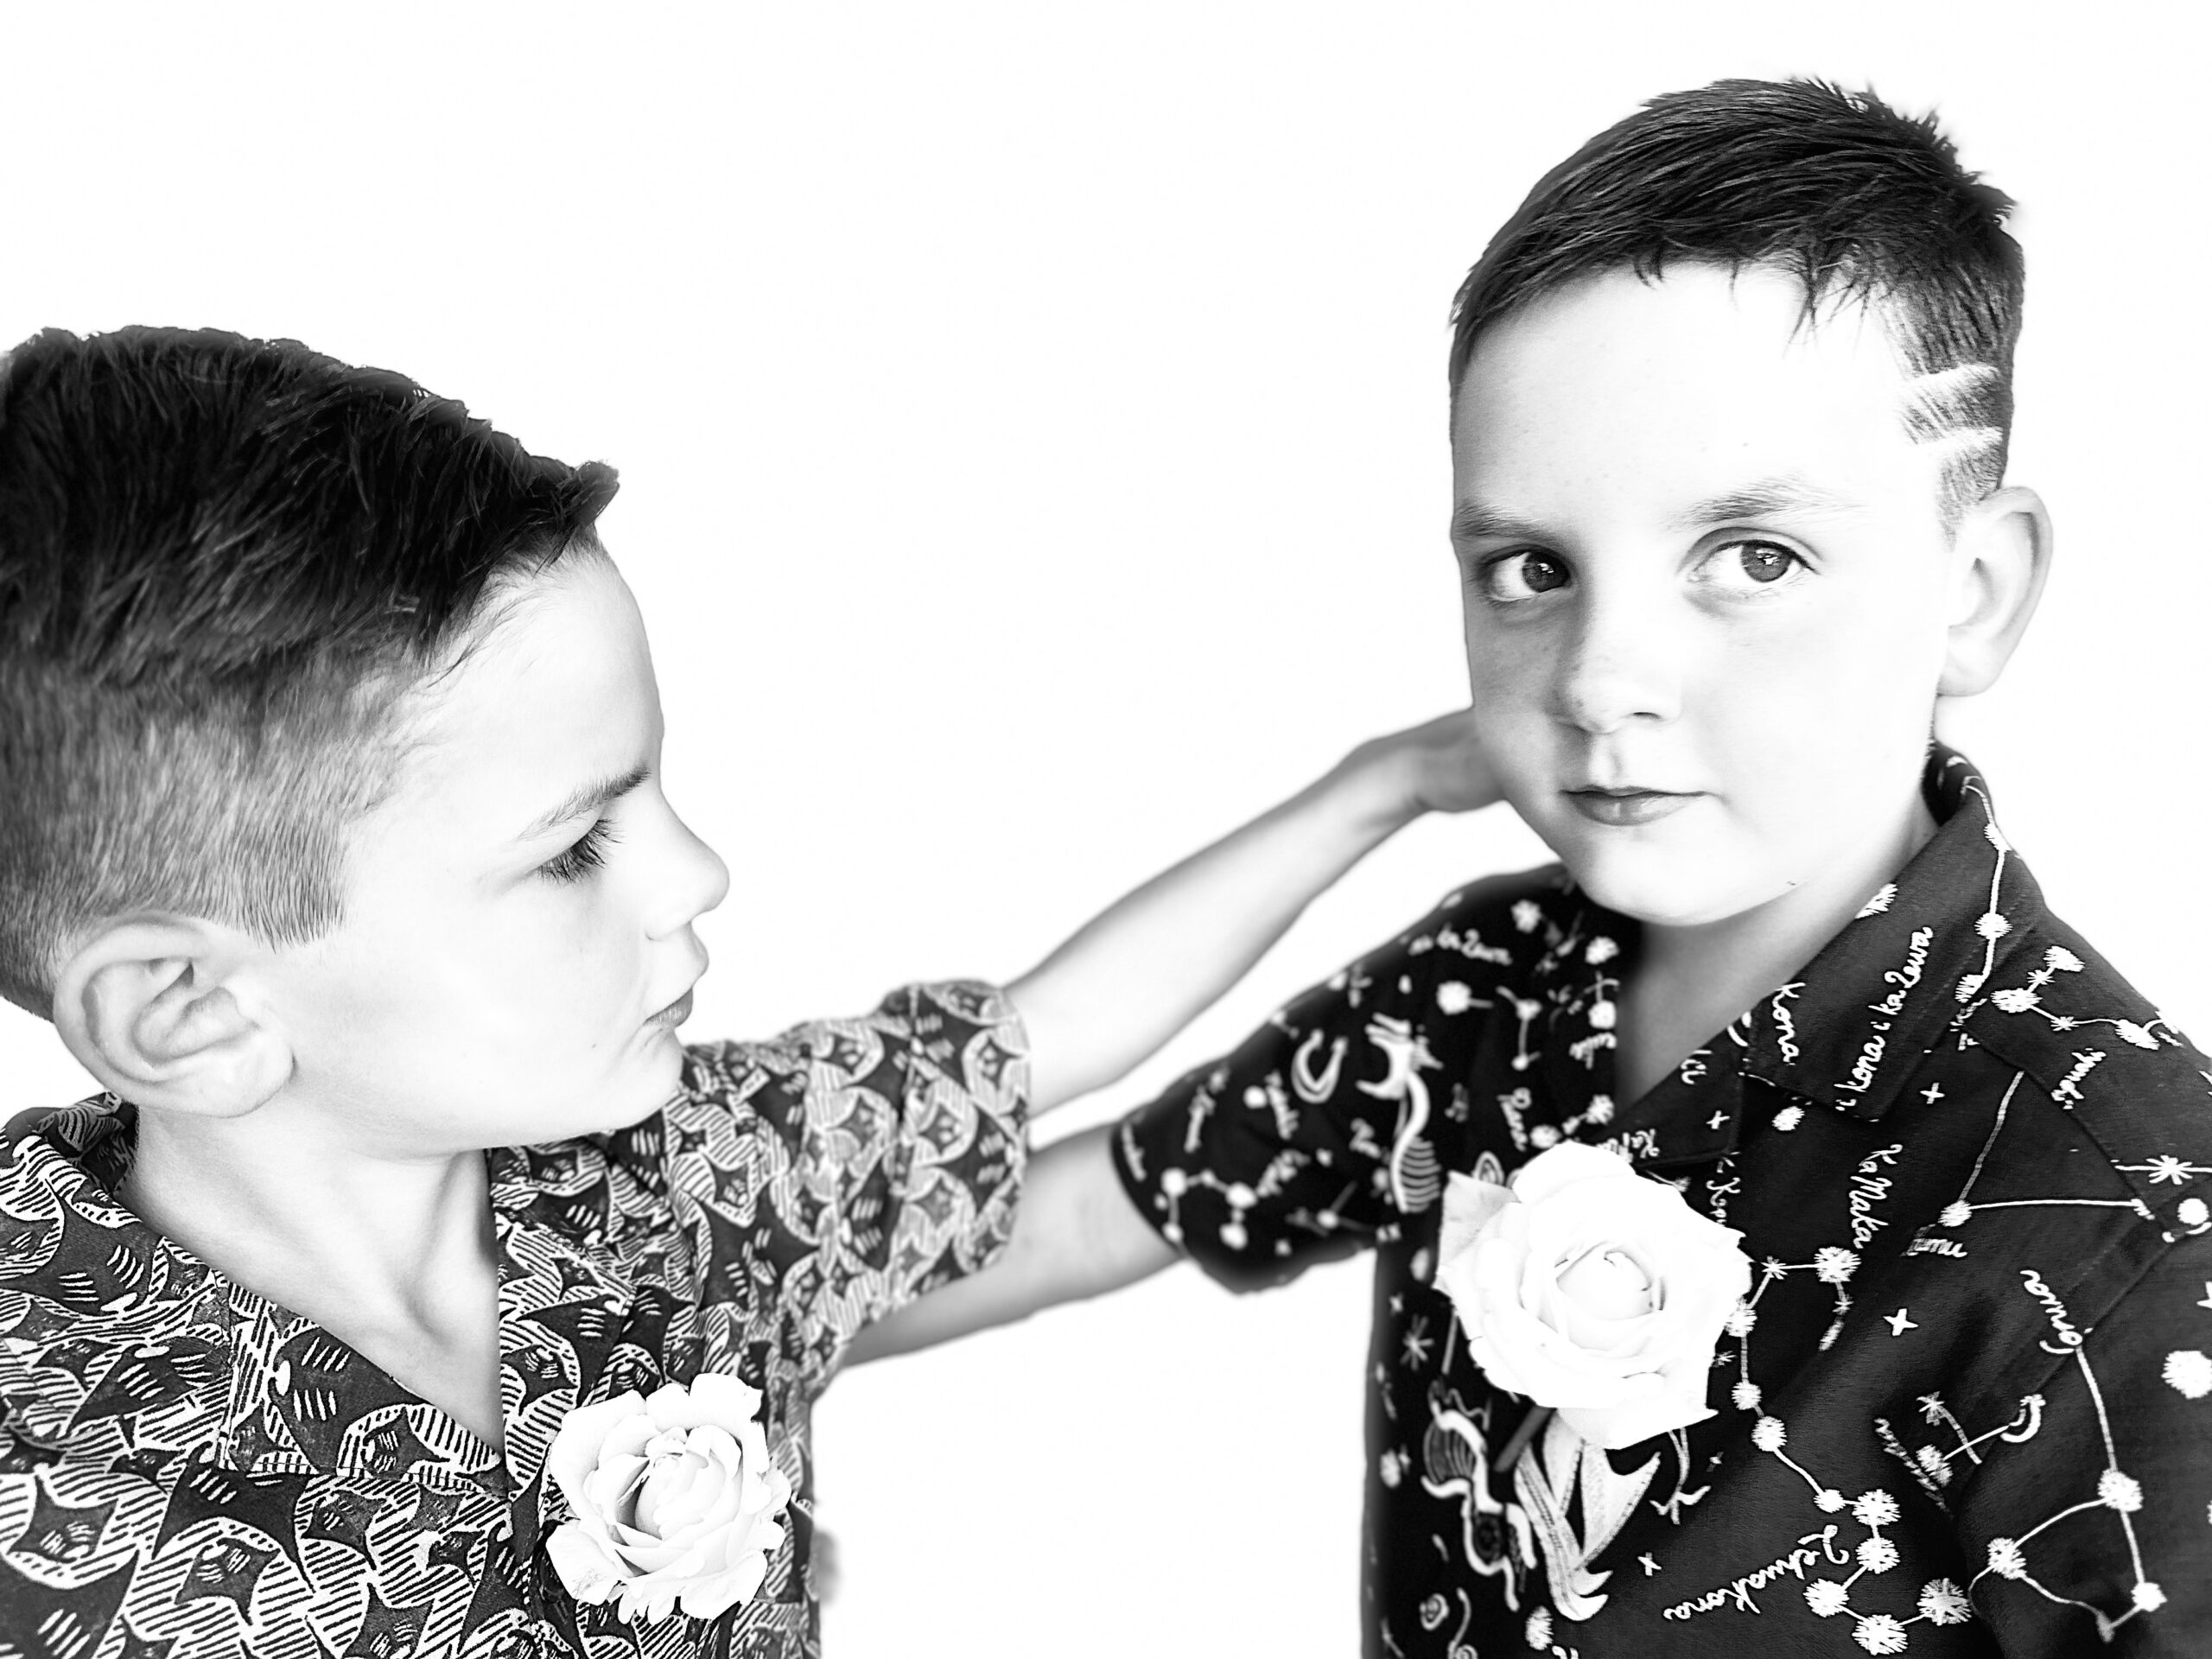 Two boys are pointing at each other in a black and white photo.